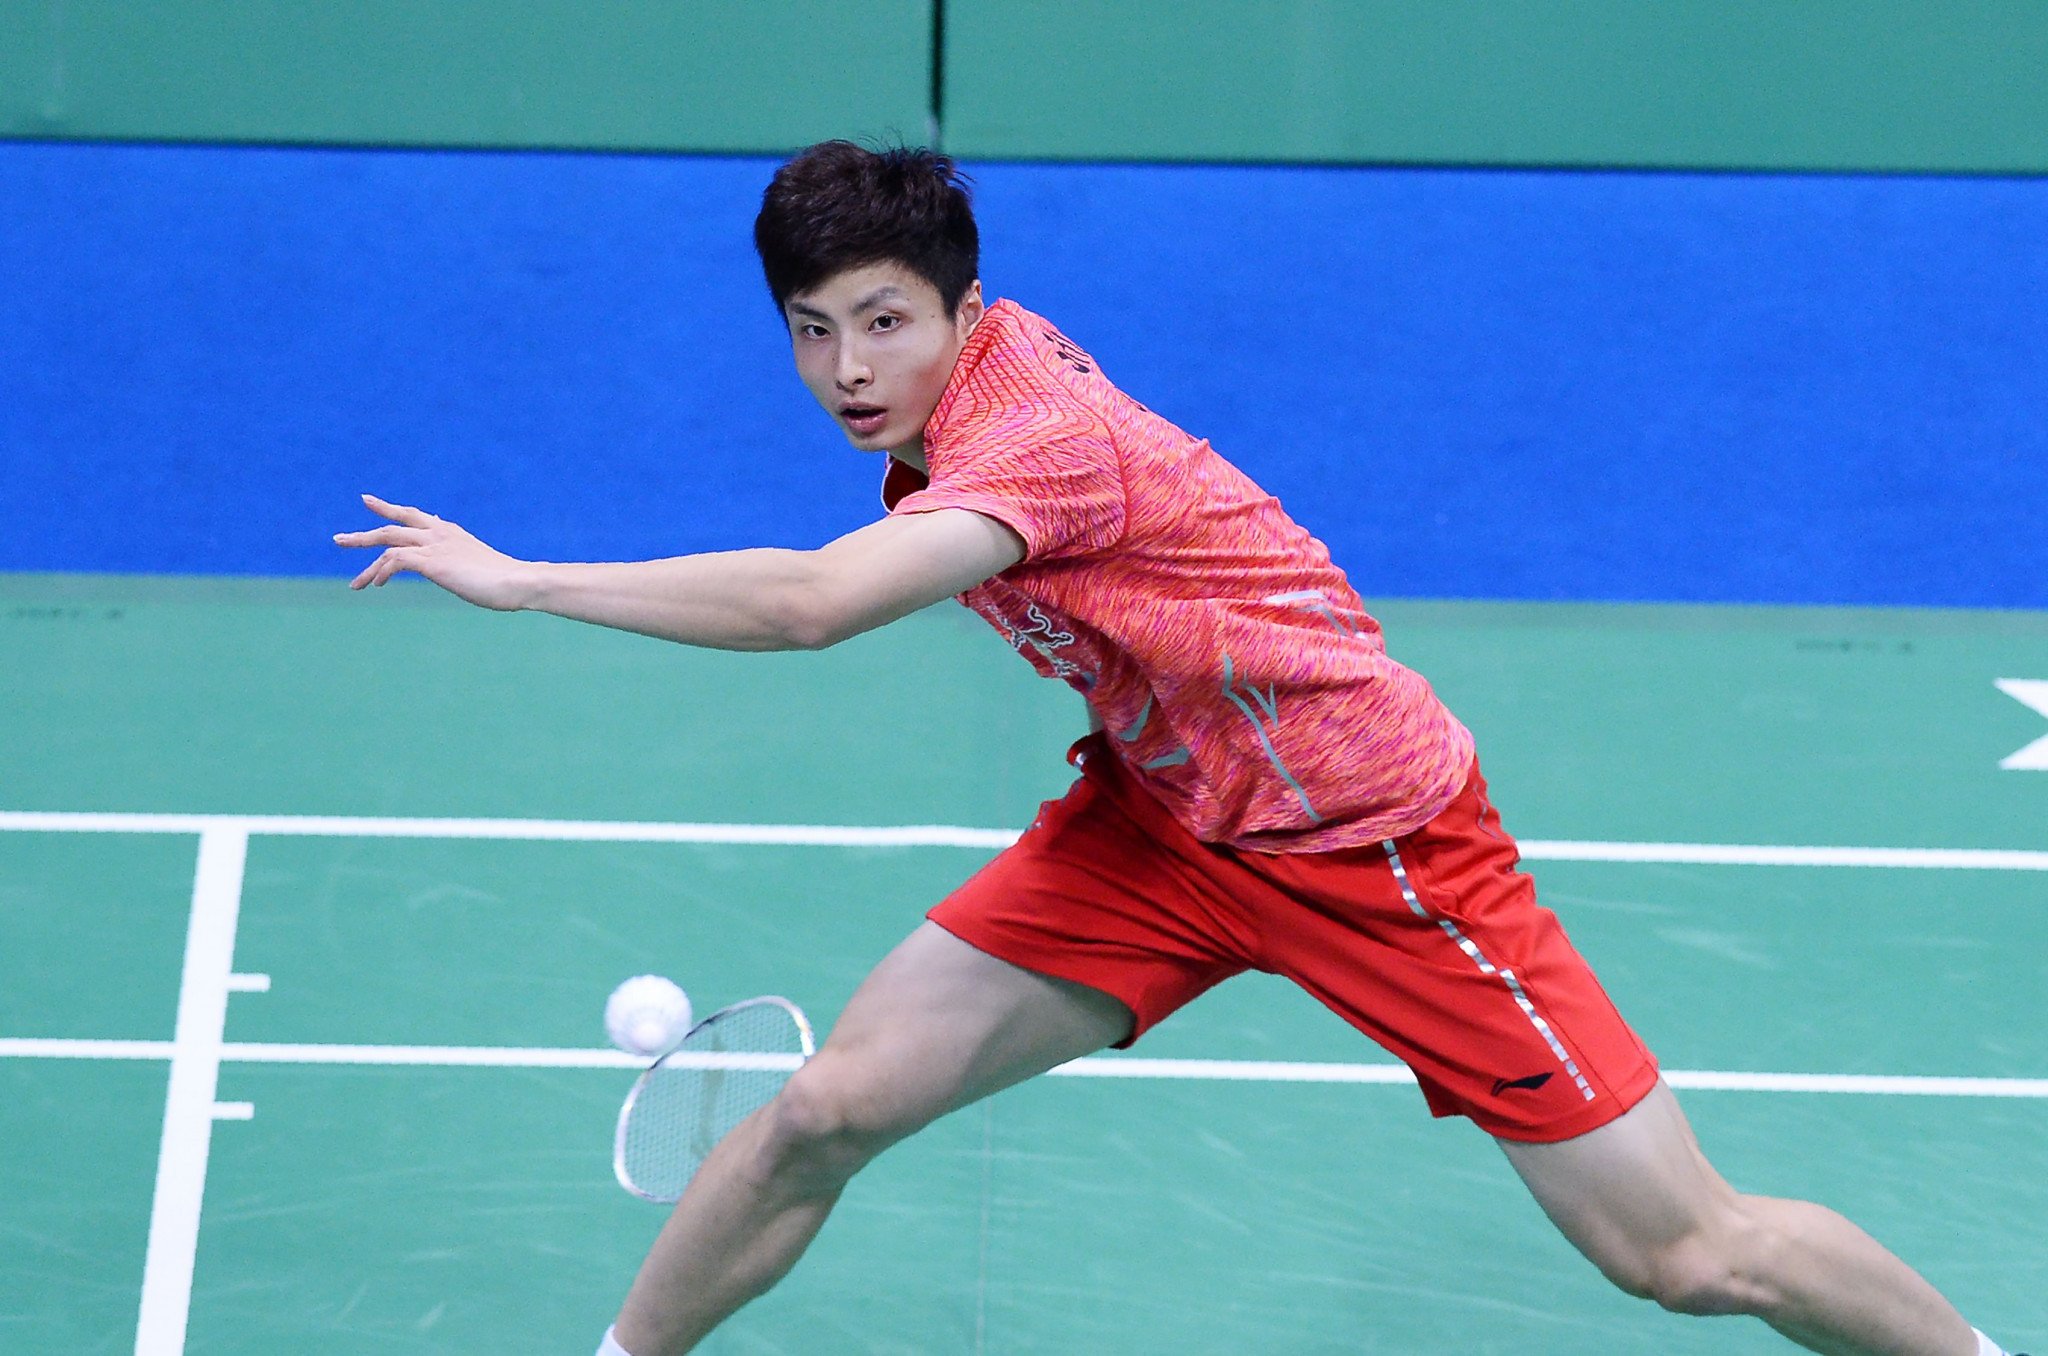 China's Shi Yuqi had no such trouble as he progressed to the second round by overcoming compatriot Zhao Junpeng ©Getty Images